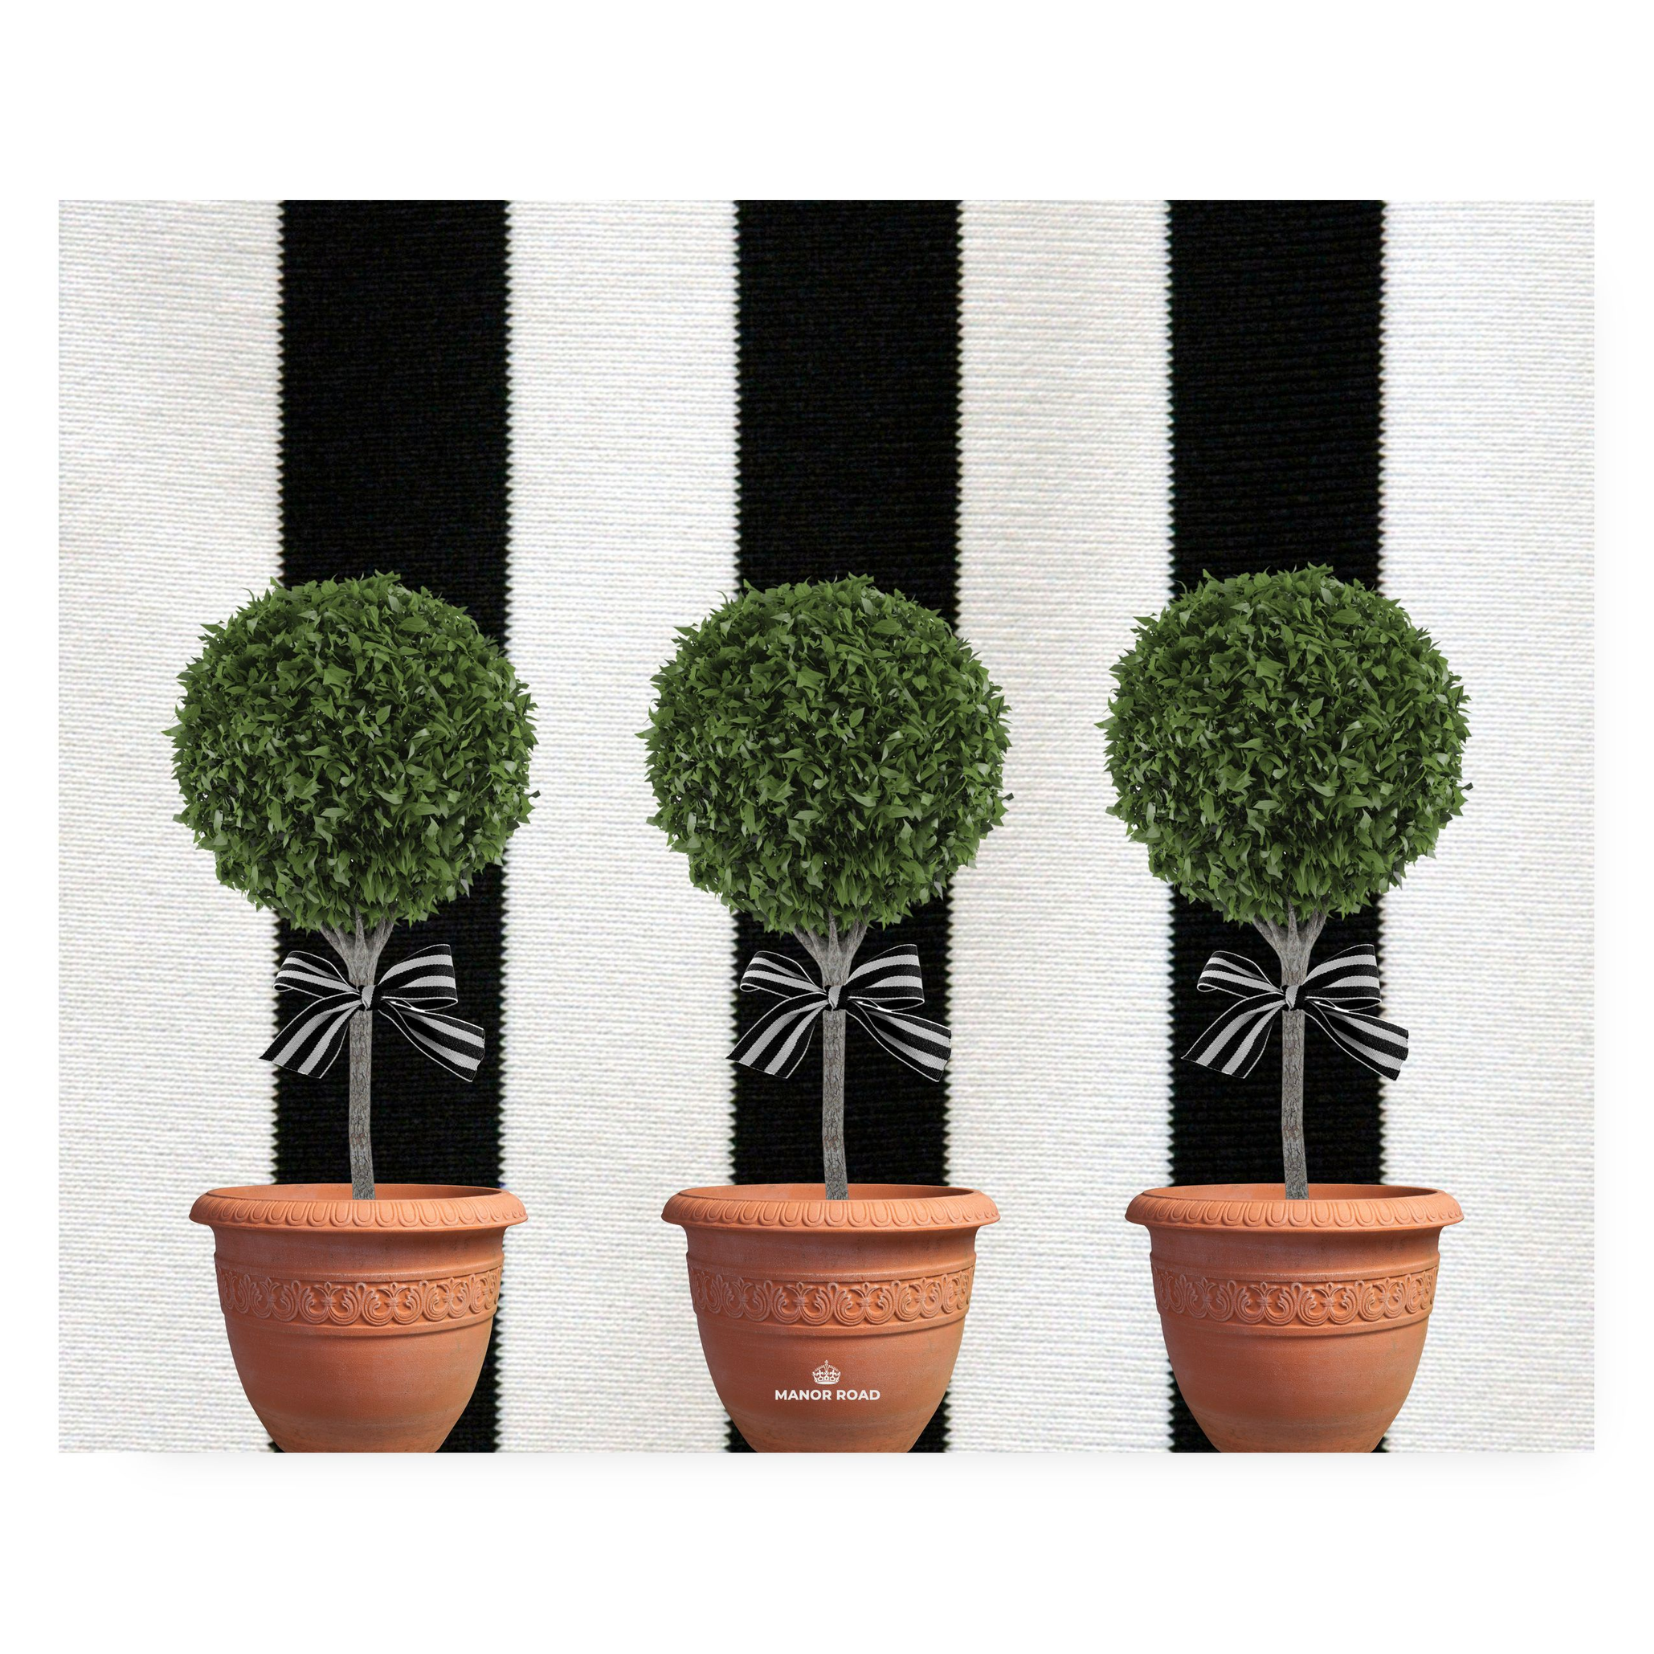 Manor Road Topiary Paper Placemats 30ct